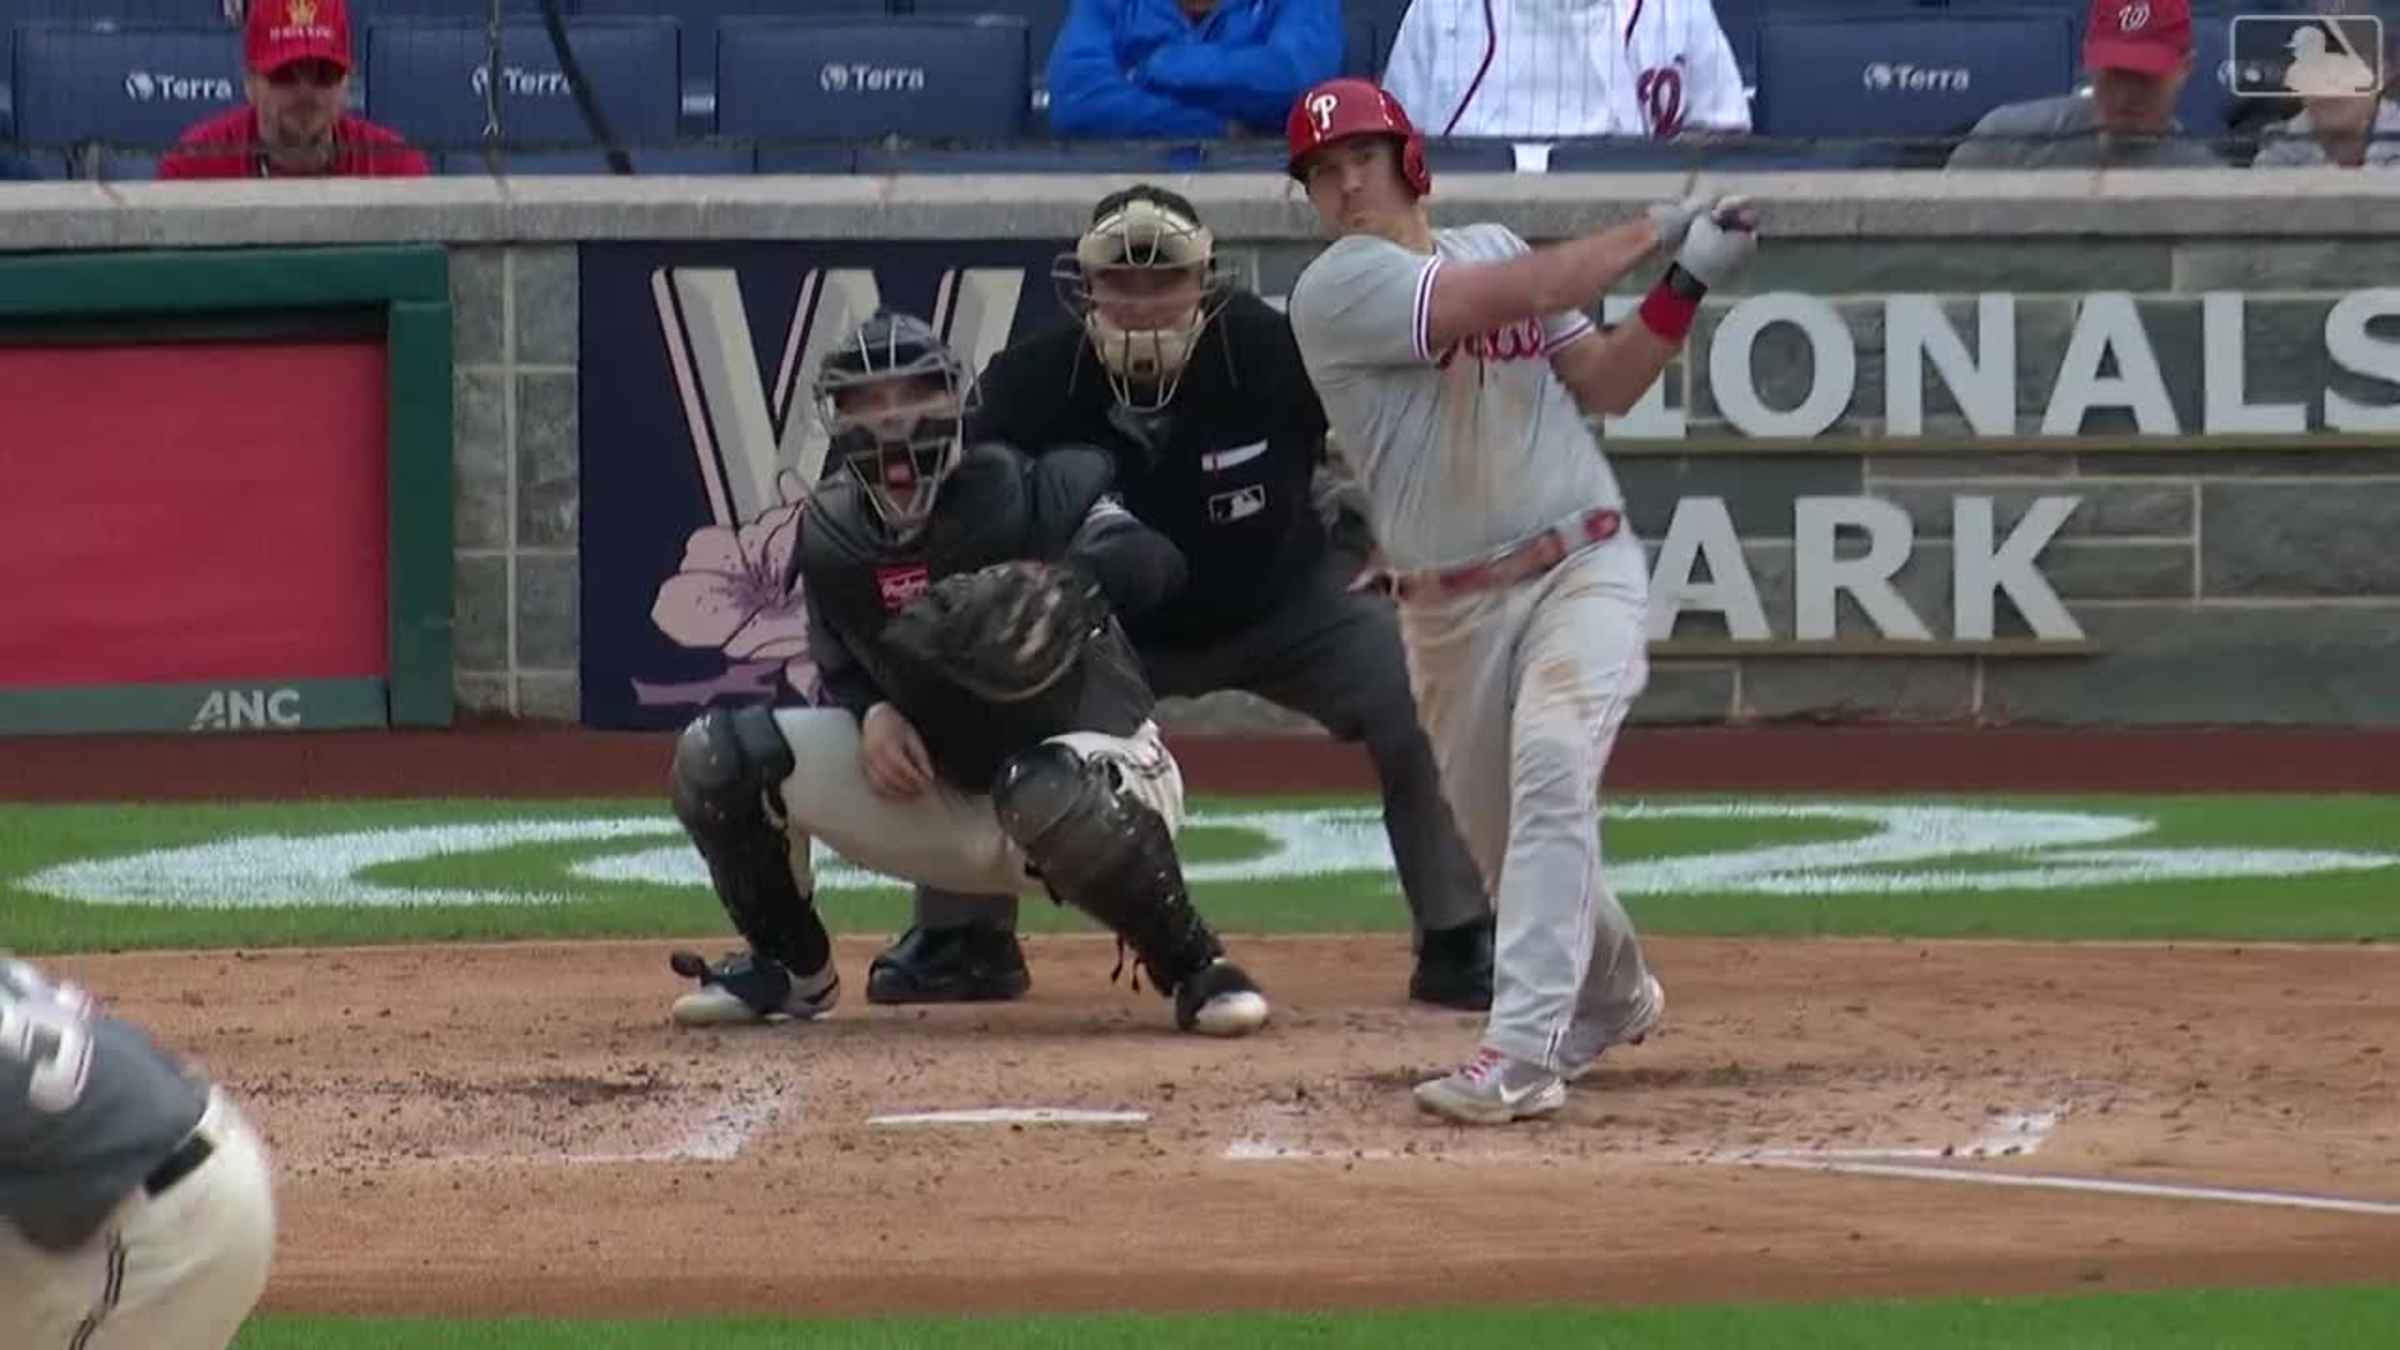 Through the rain, the Phillies take 3-of-4 from the Nats; MAGIC